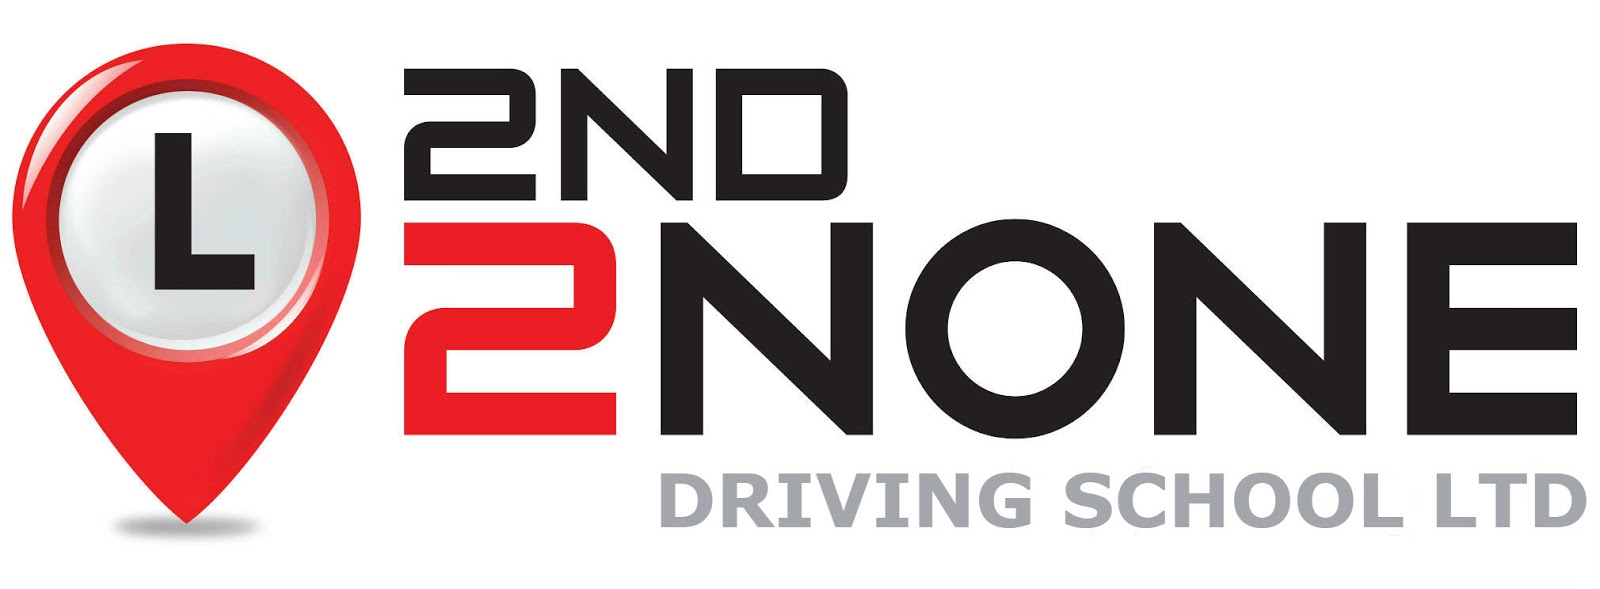  The best driving school near you